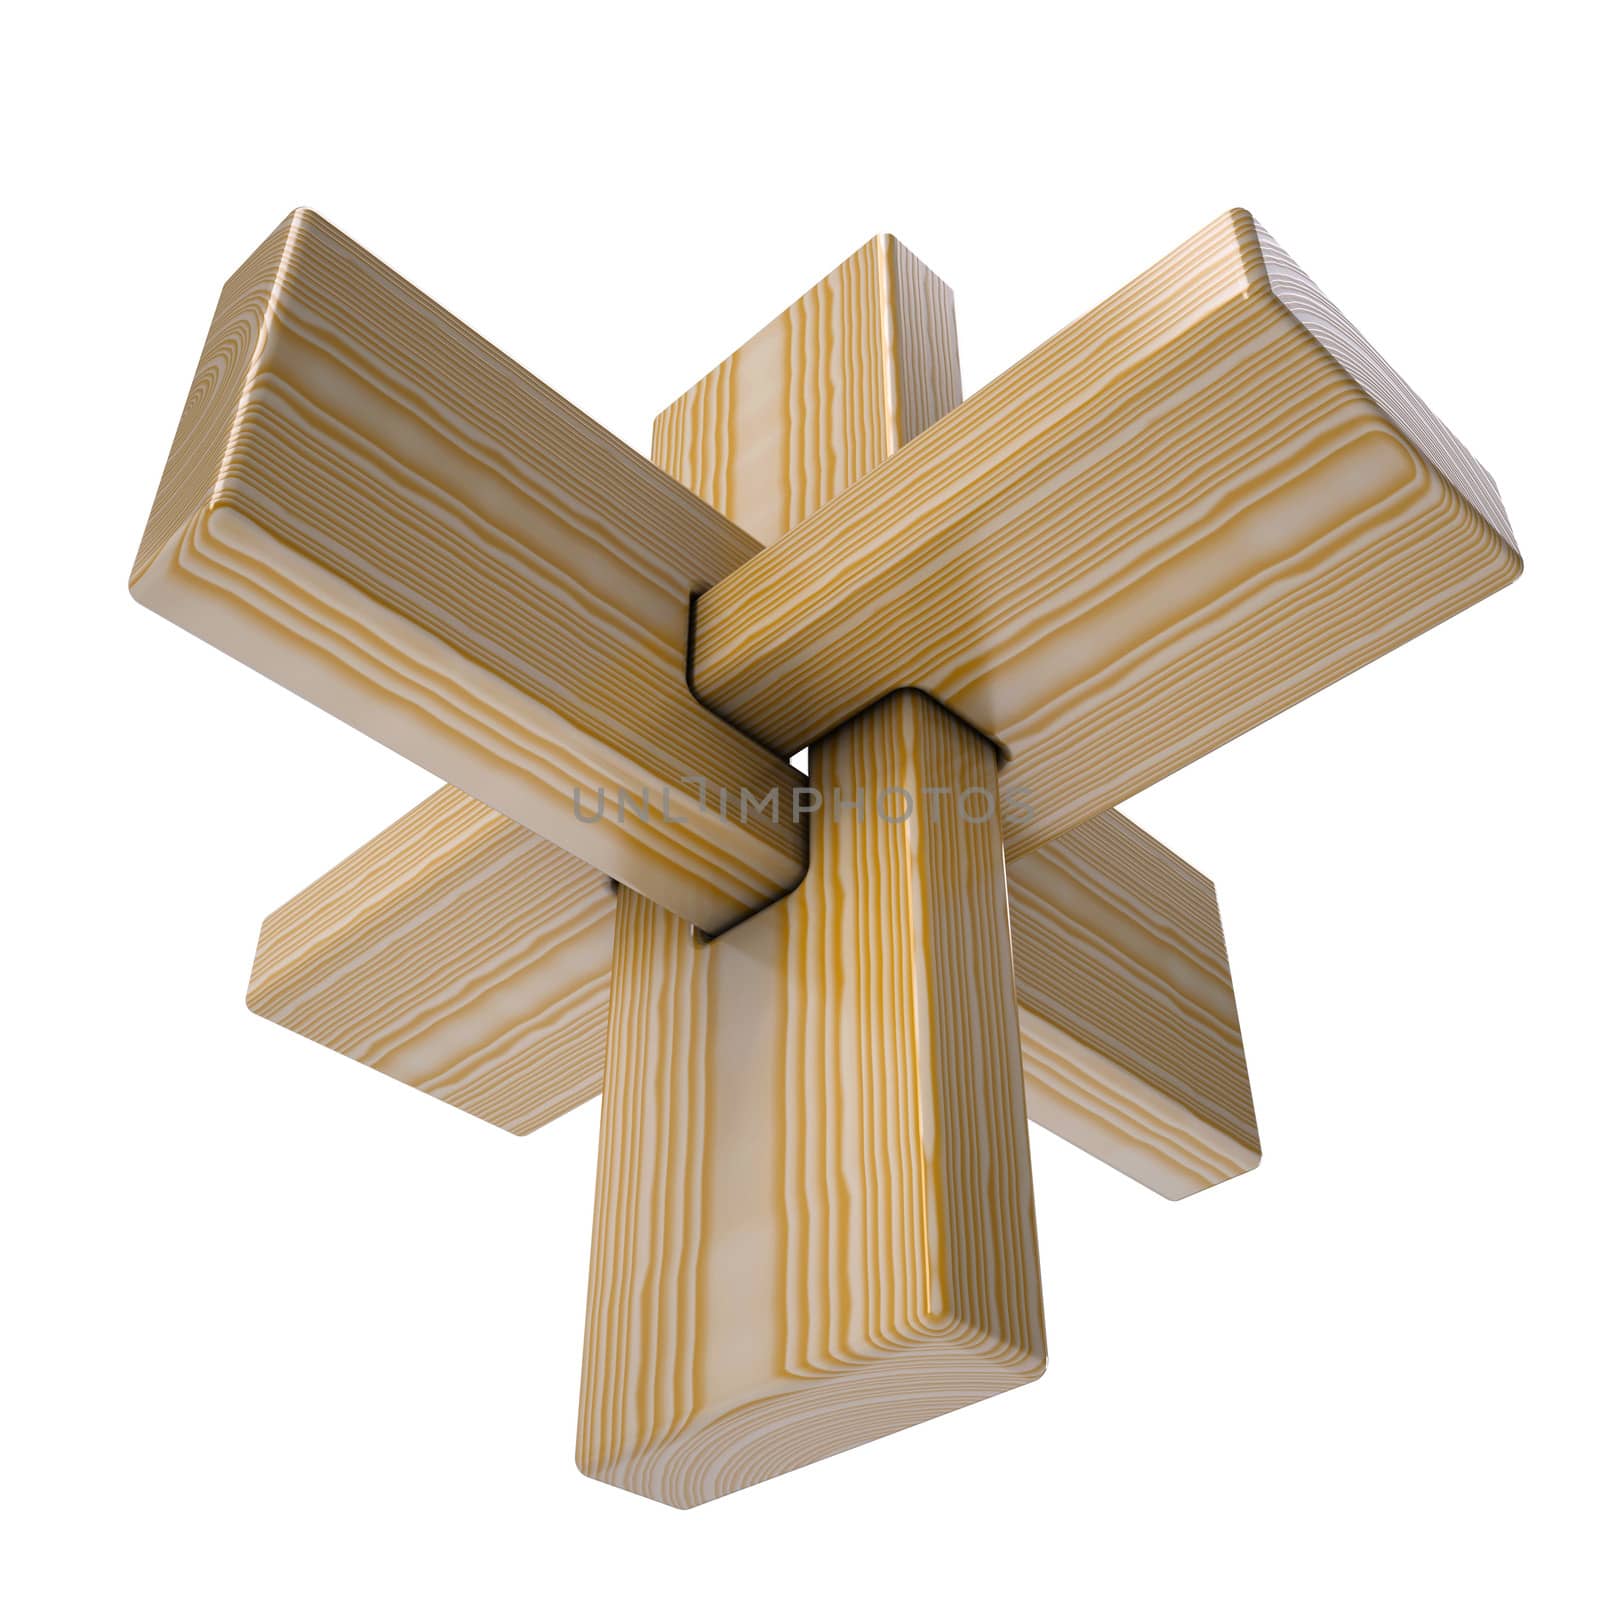 Wooden abstract 3D shape. Isolated render on a white background